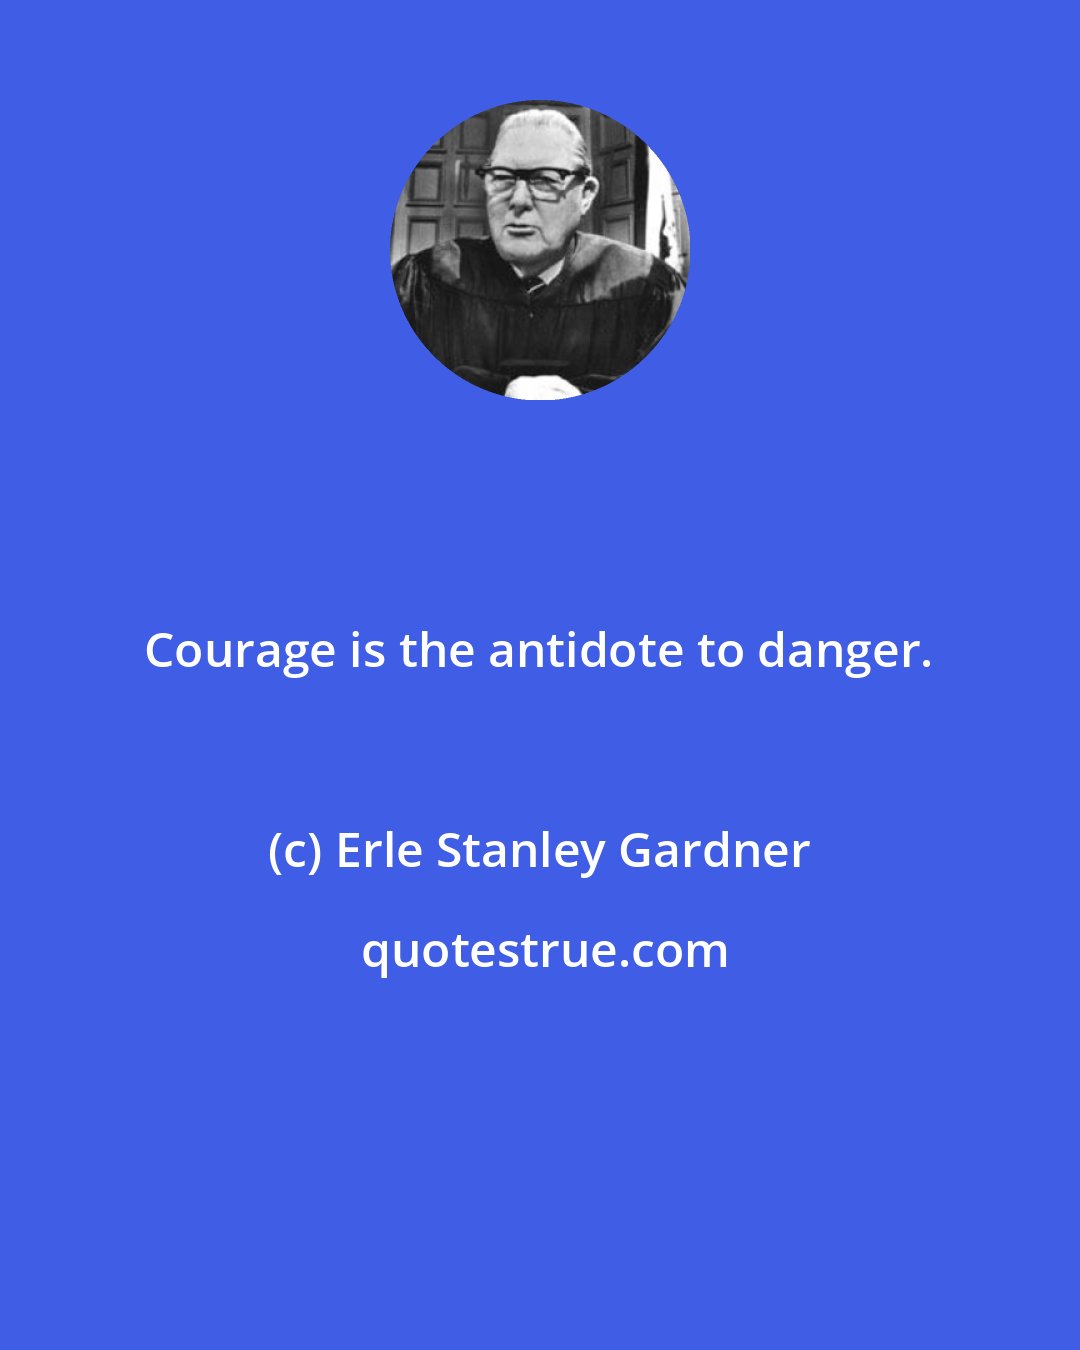 Erle Stanley Gardner: Courage is the antidote to danger.